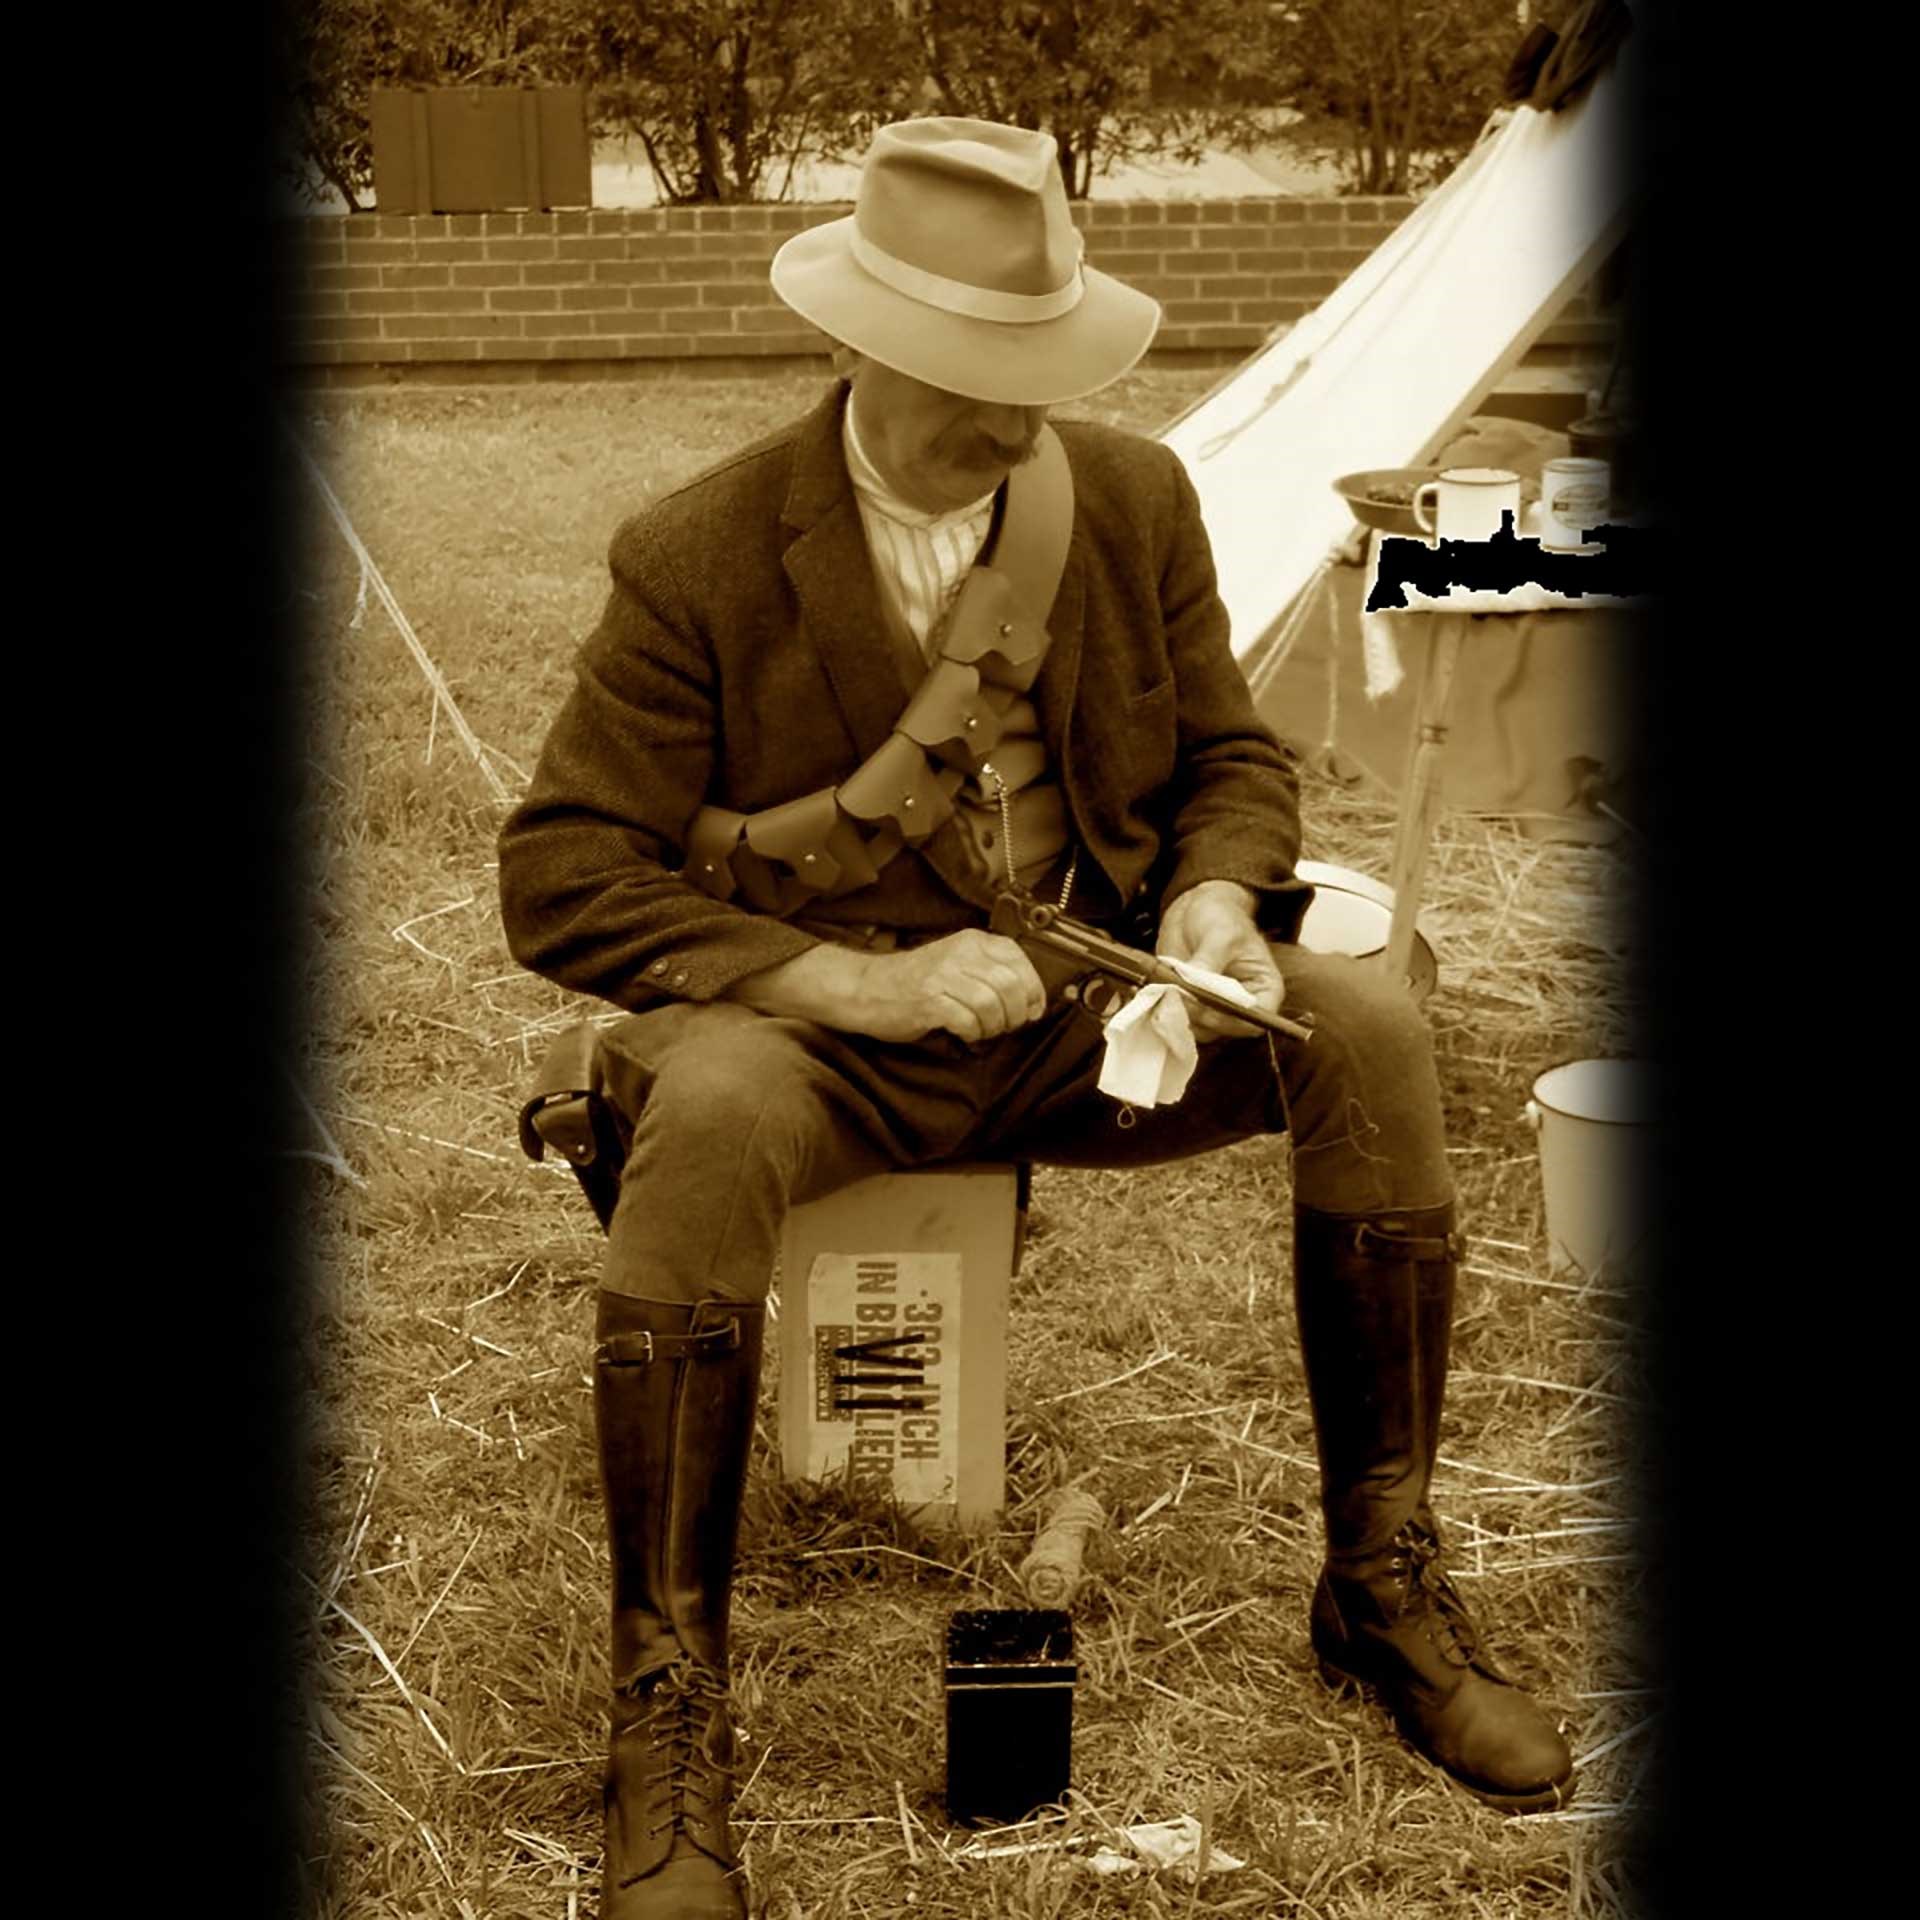 A man sitting on a wooden box, cleaning his Luger pistol in a campsite.